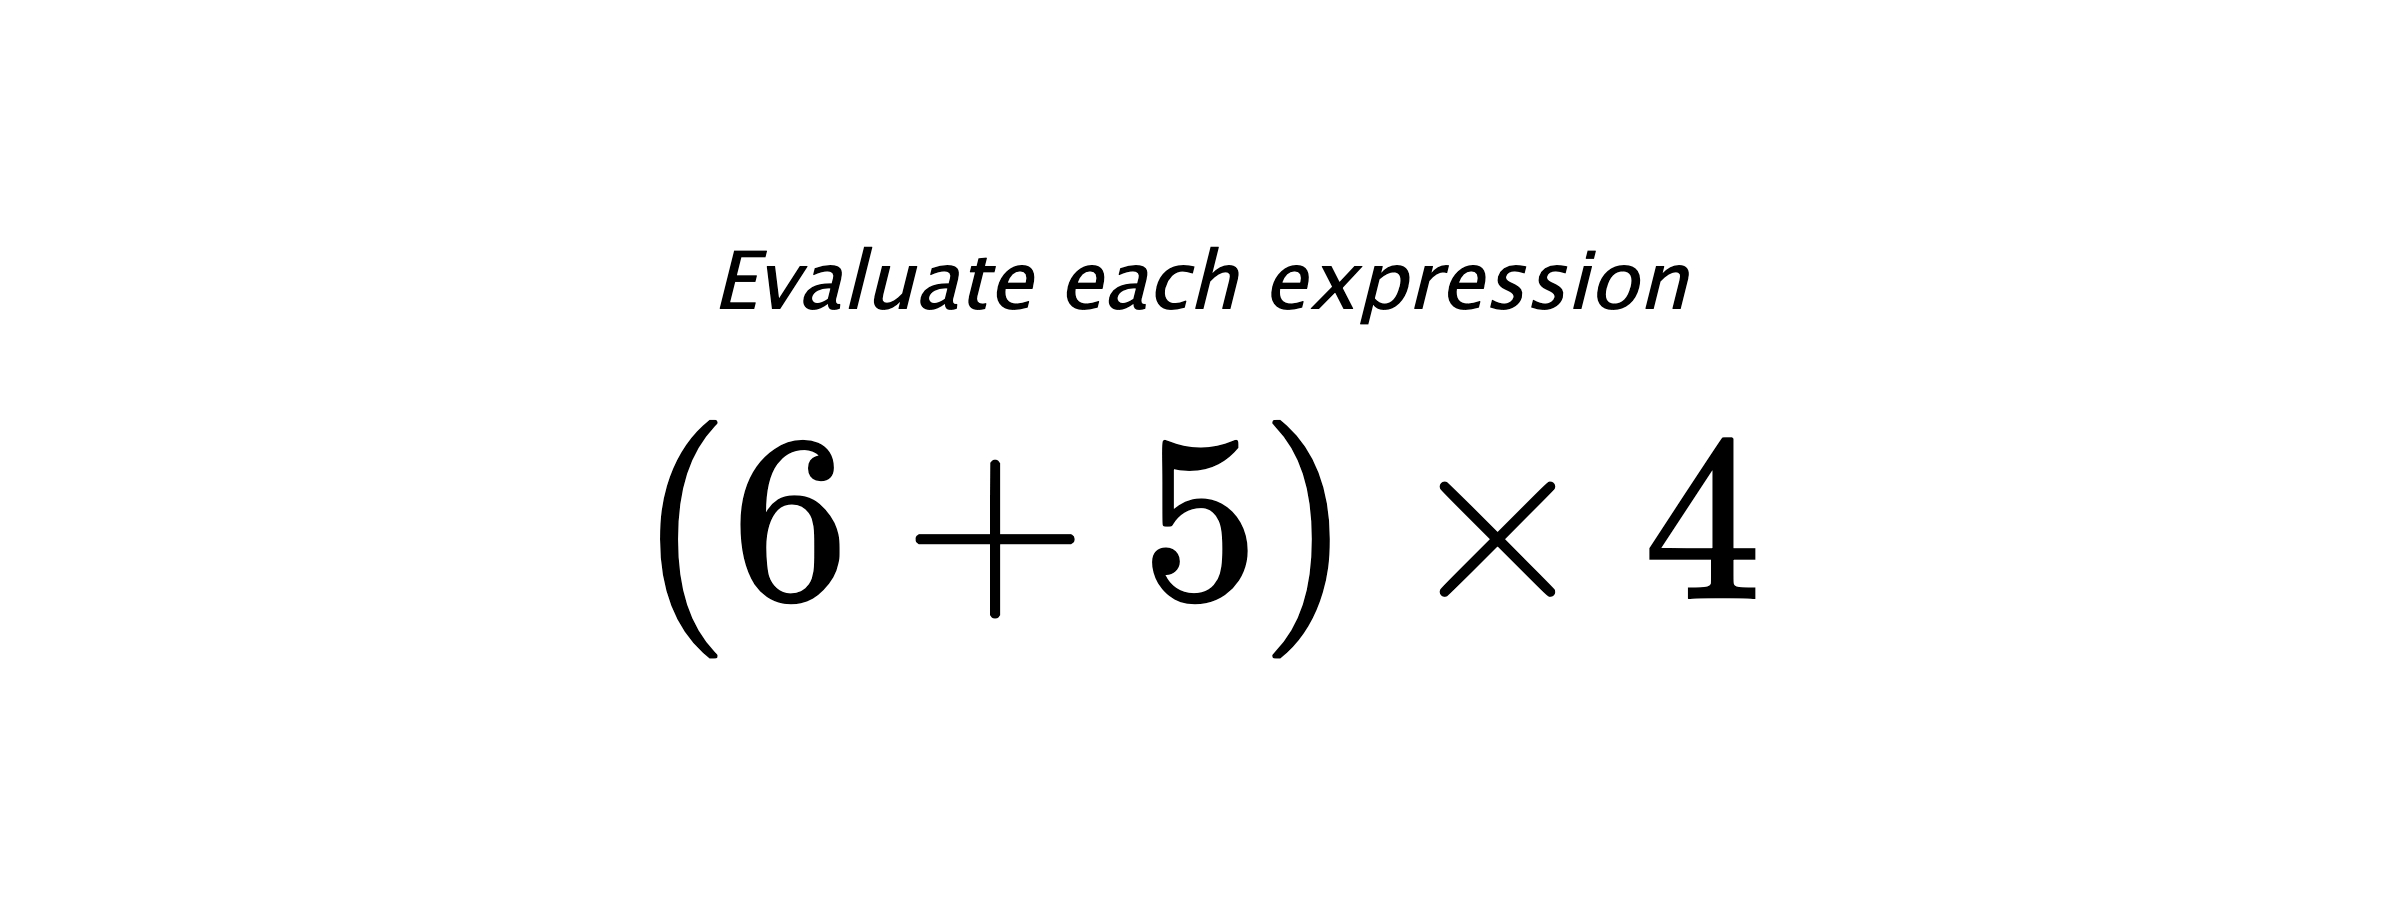 Evaluate each expression $ (6+5) \times 4 $